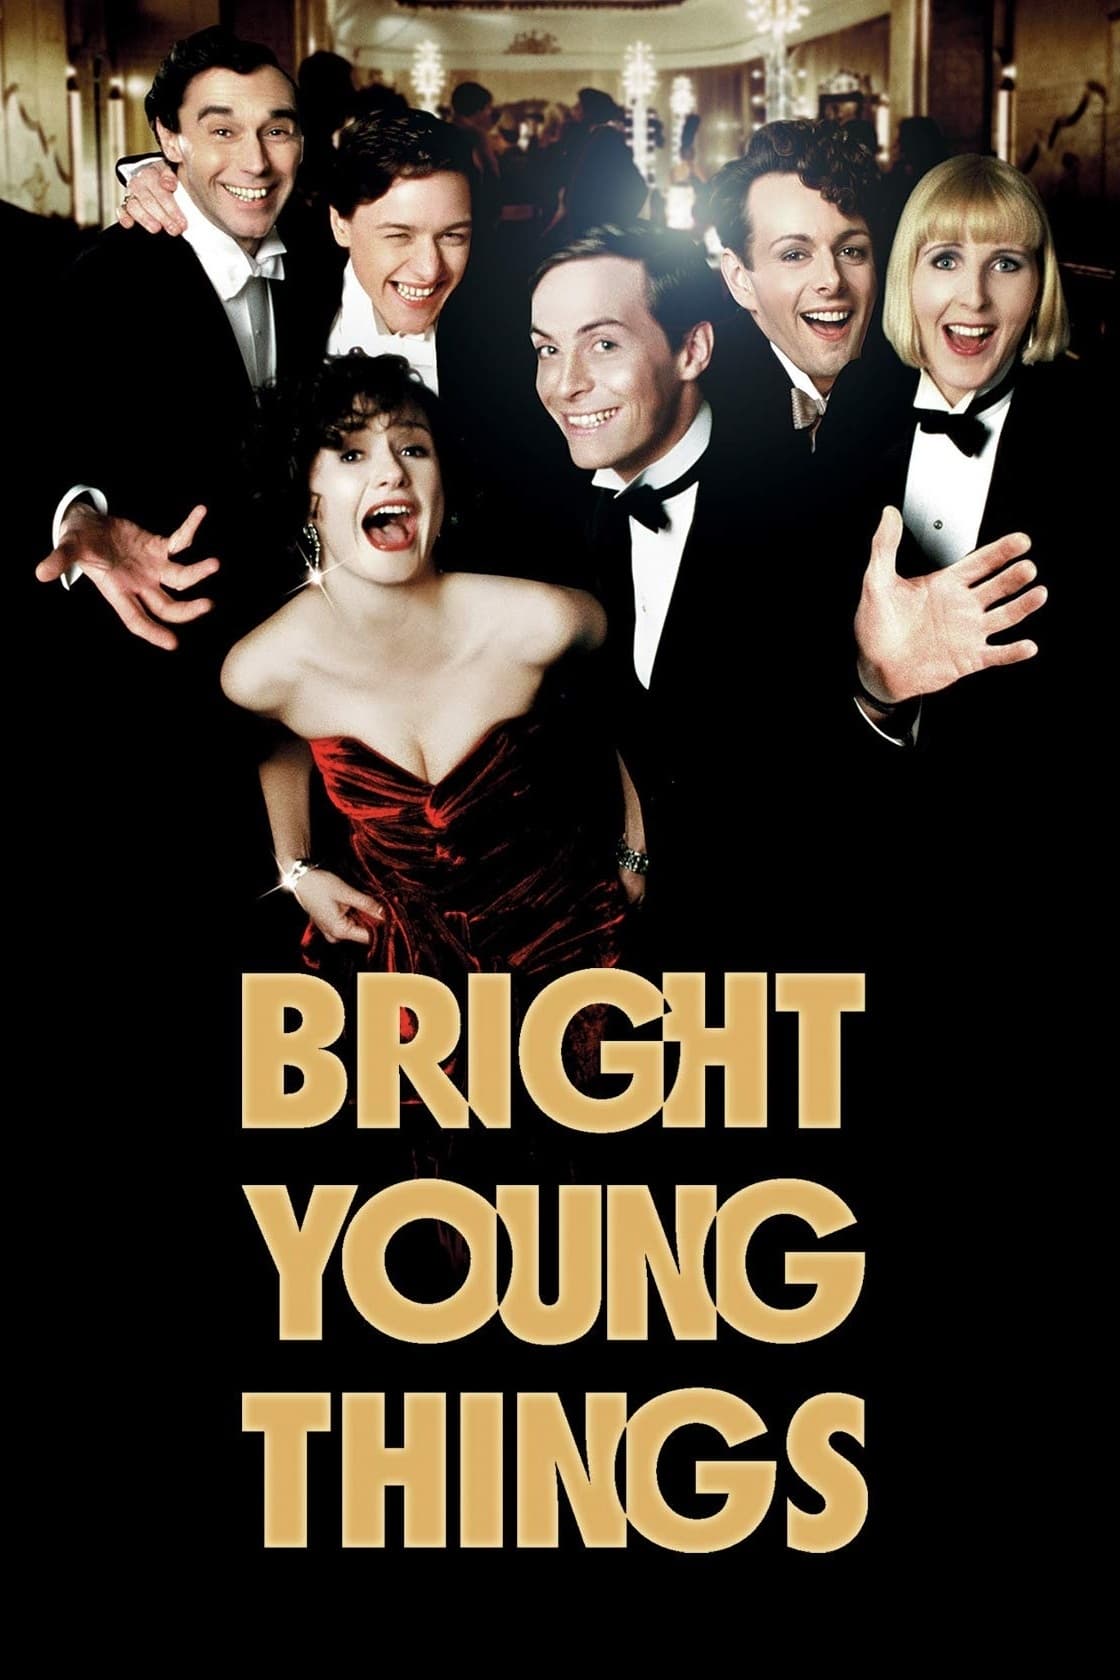 Bright Young Things film